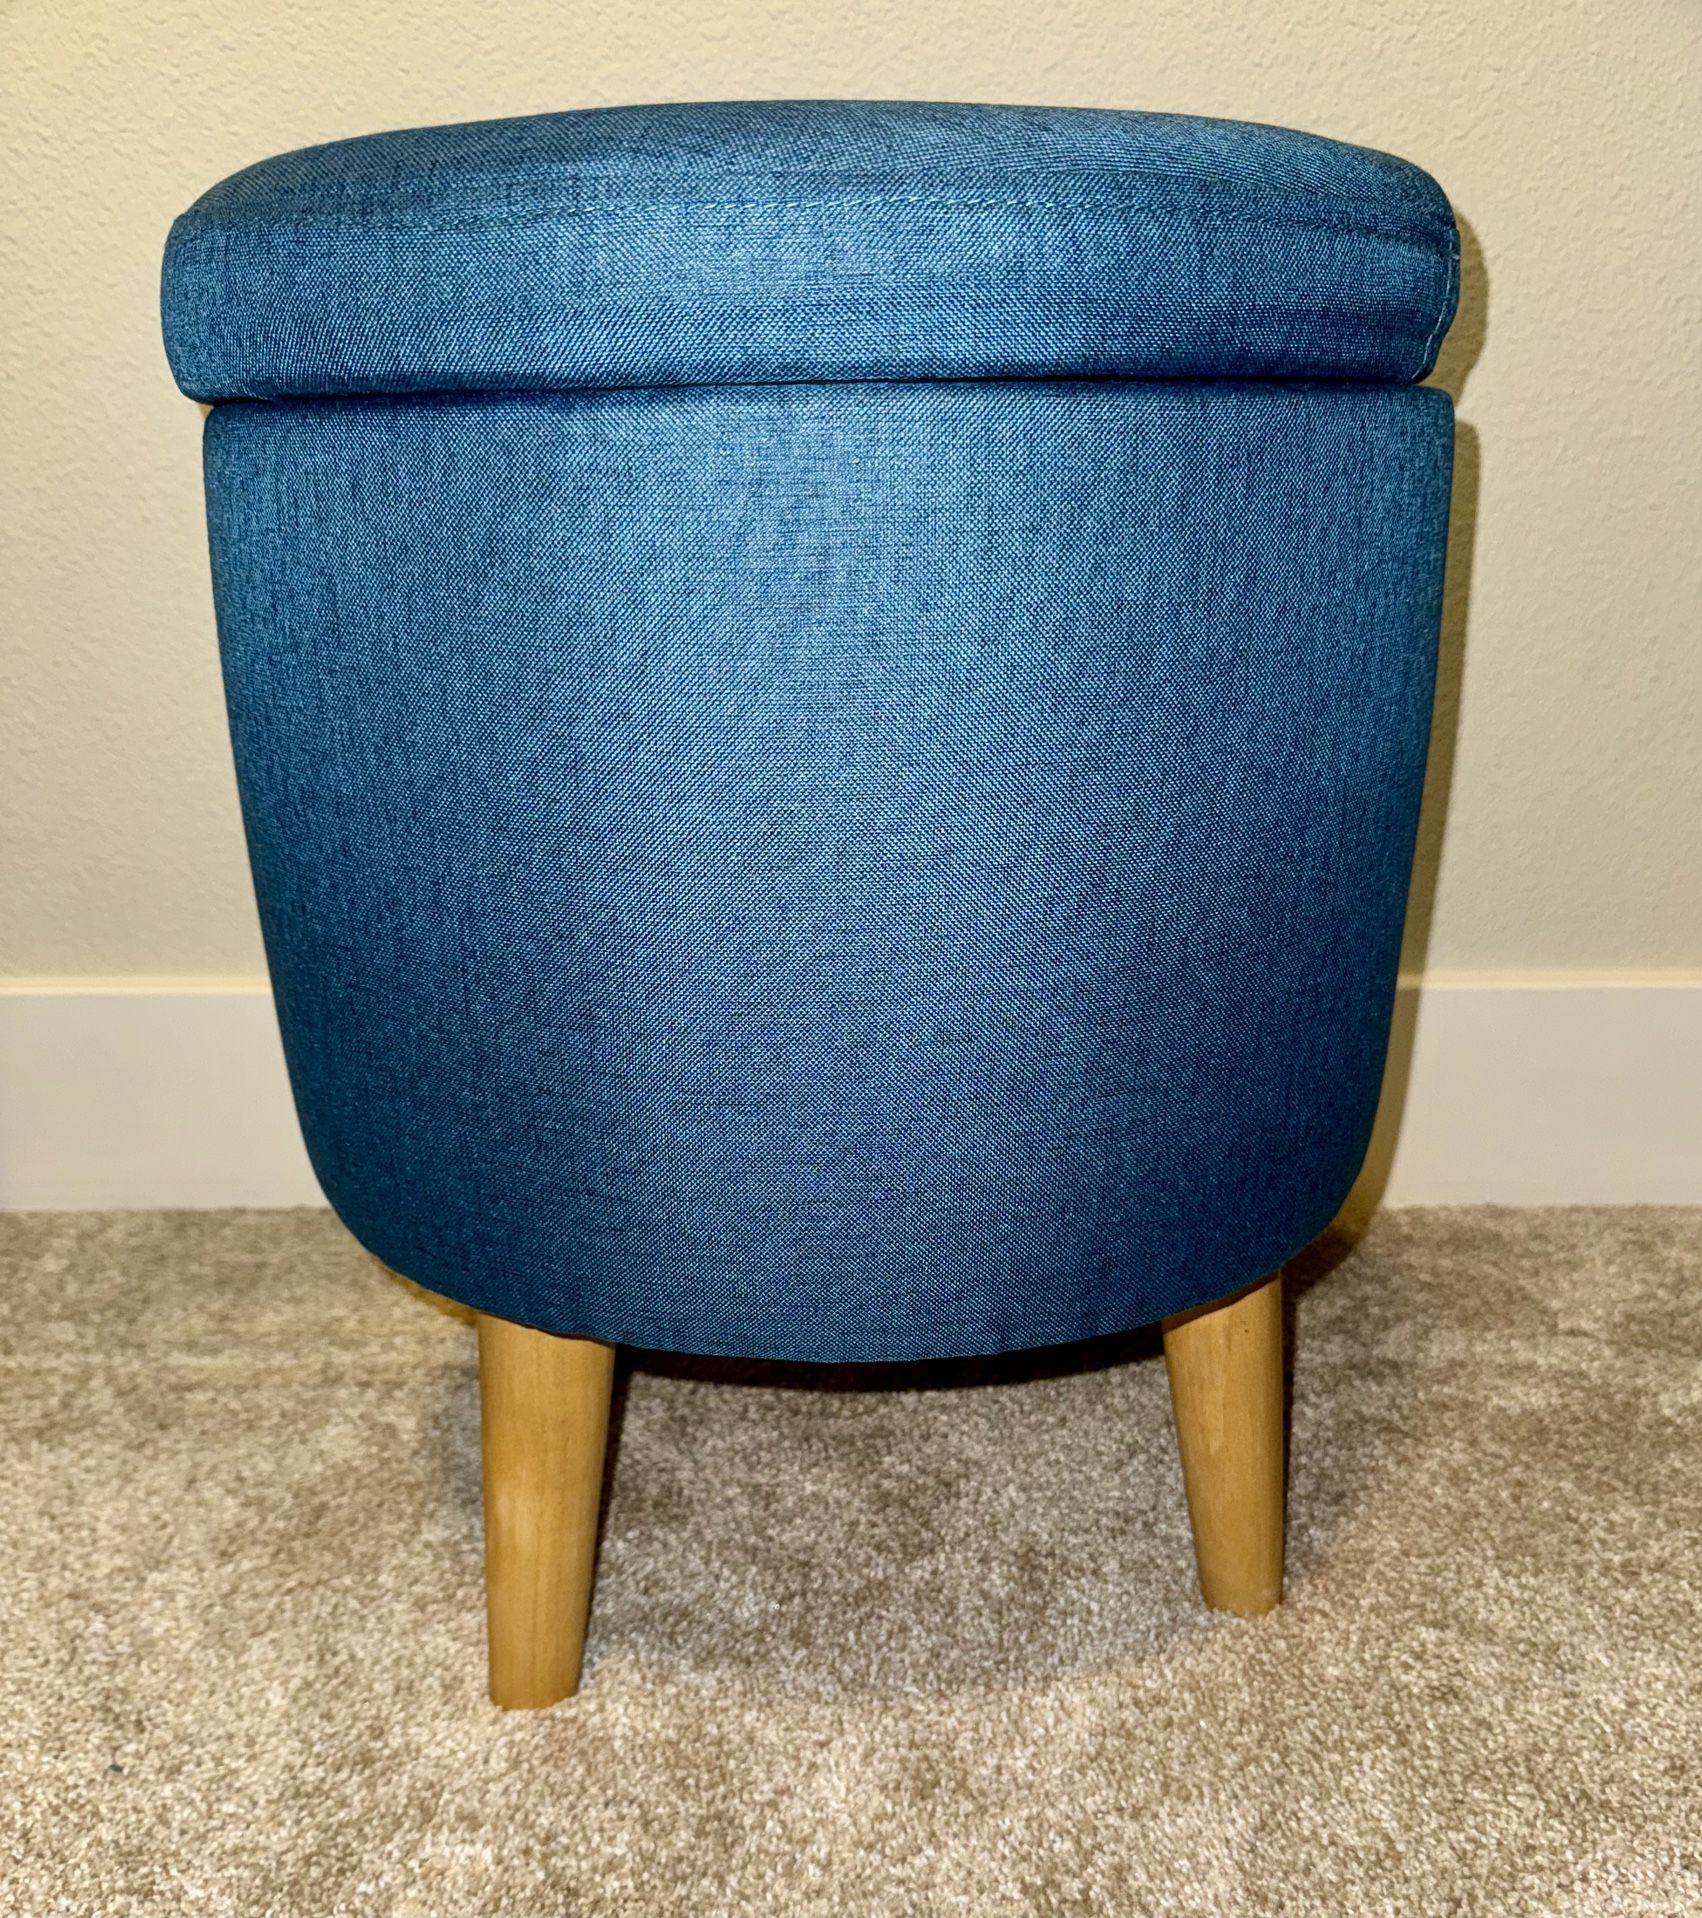 Small Round Storage Ottoman Footrest Chair with Wood Legs